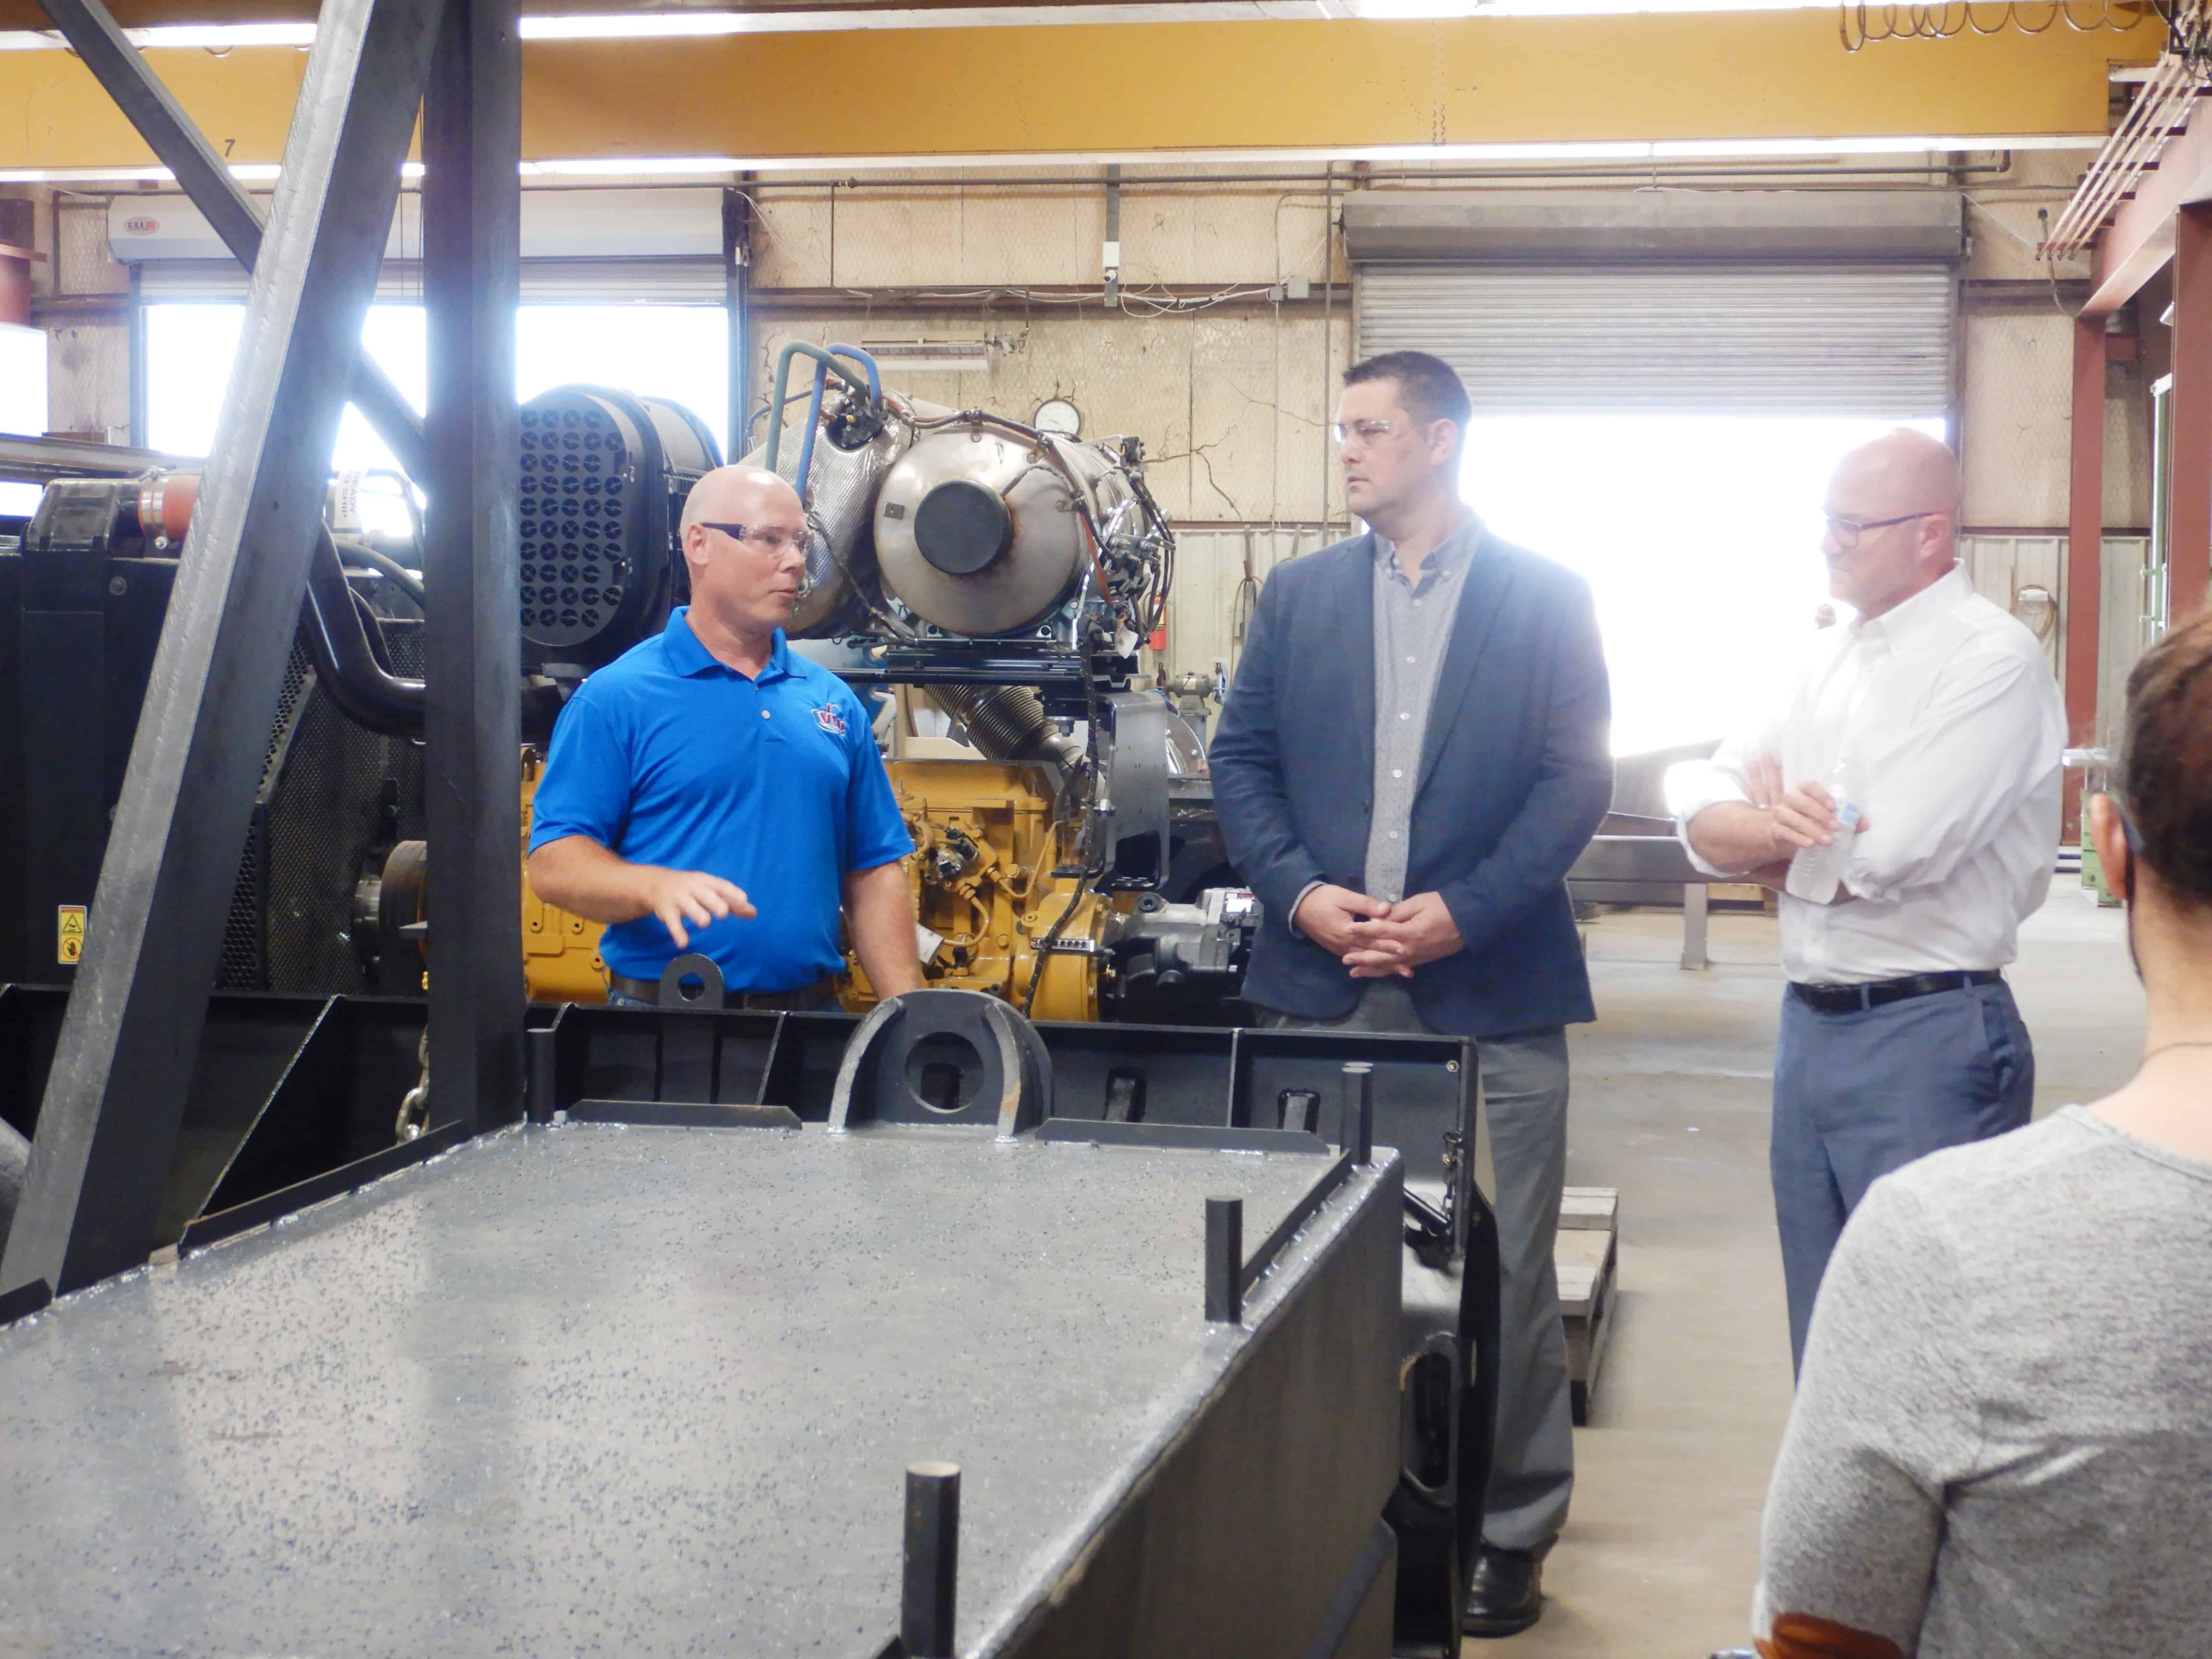 VMI hosts tour of facility